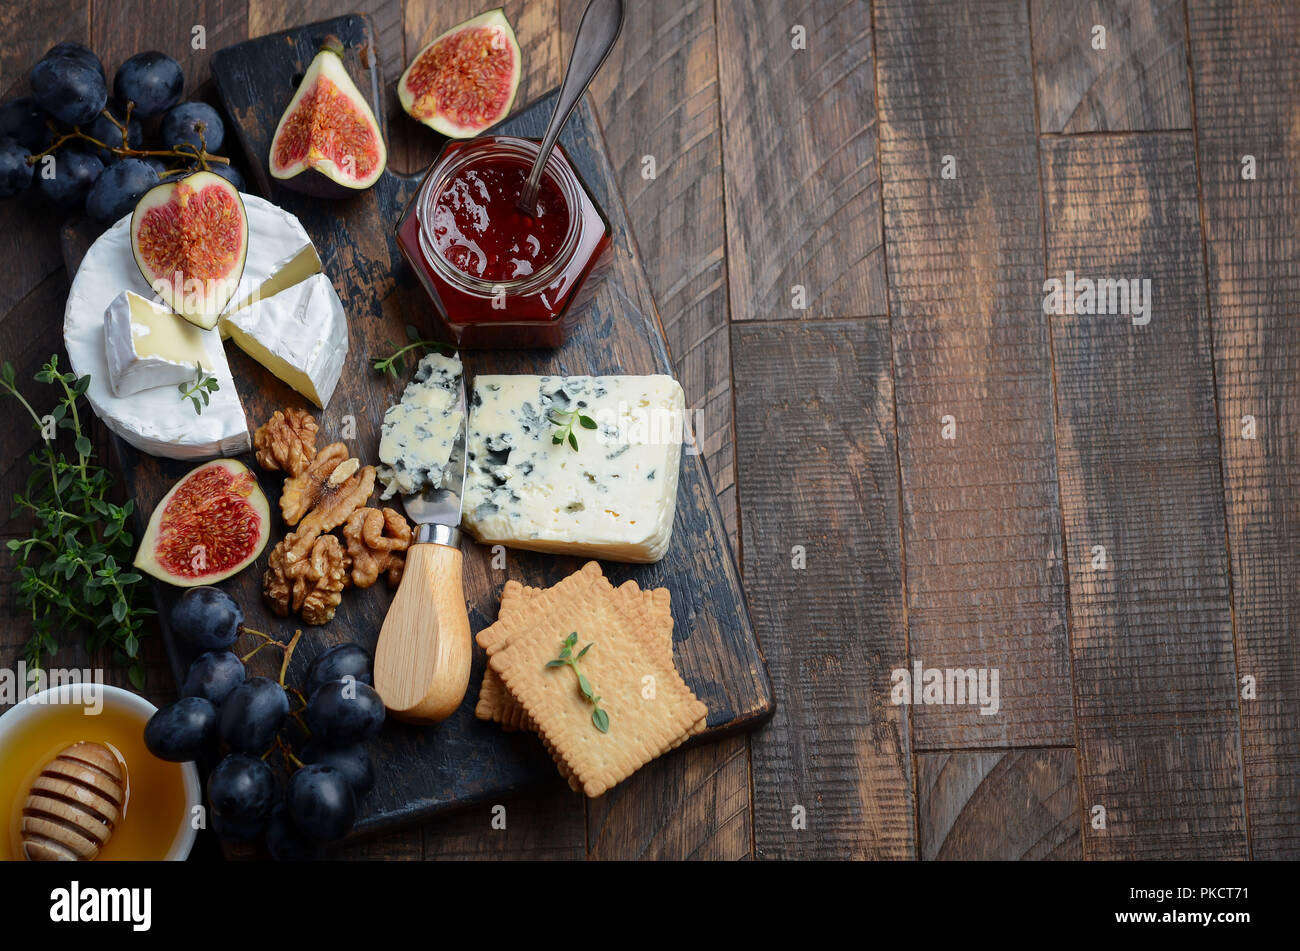 Cheese plate with grapes, figs, crackers, honey, plum jelly, thyme and nuts, selective focus. Stock Photo